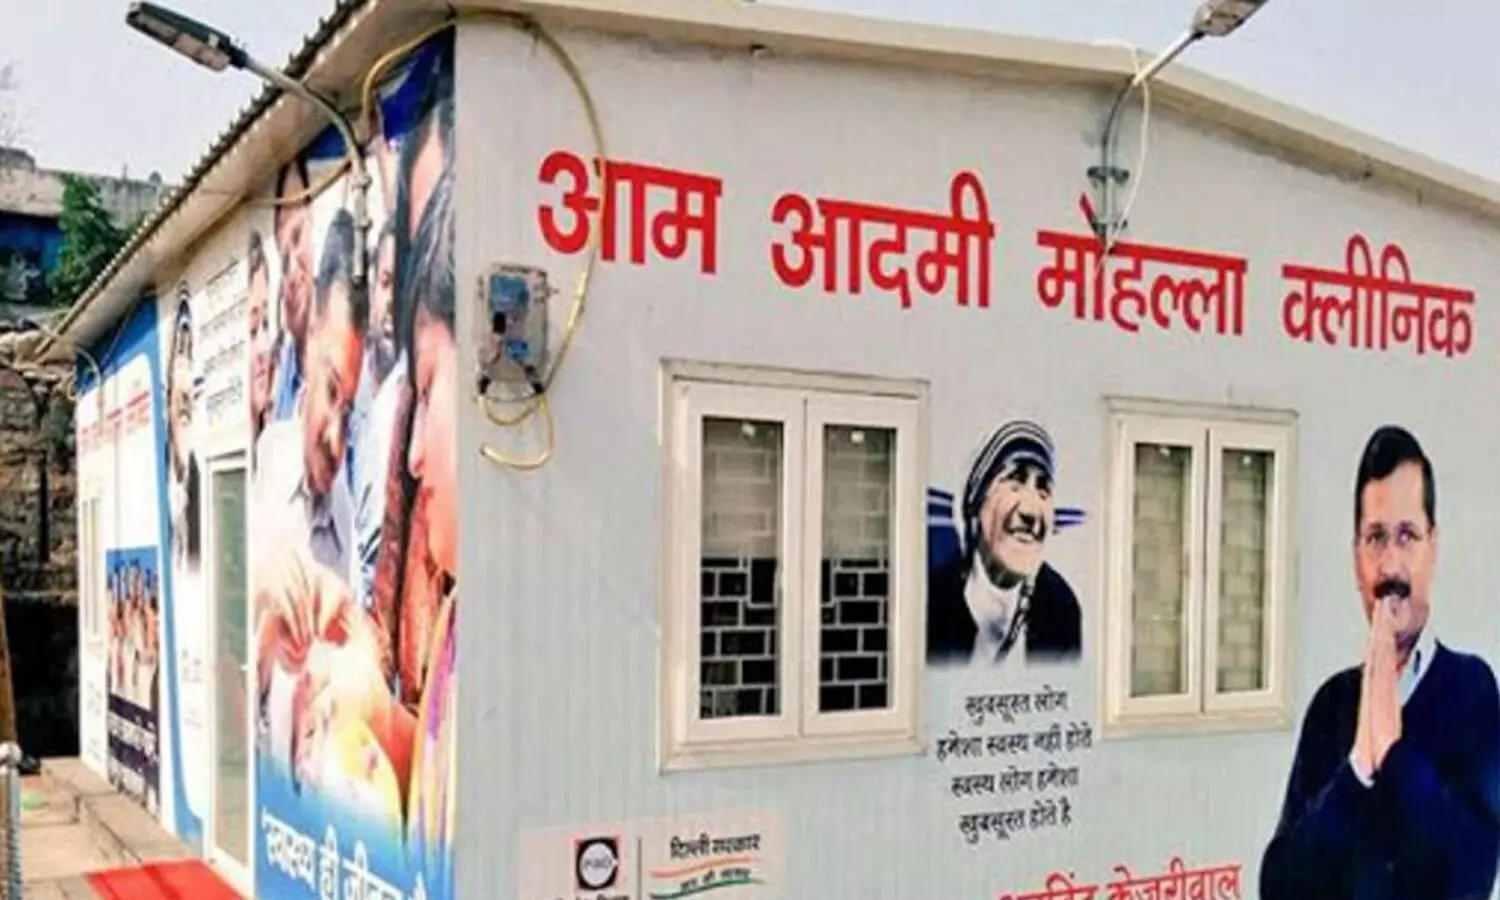 Delhi: Another Mohalla Clinic doctor tests positive for coronavirus